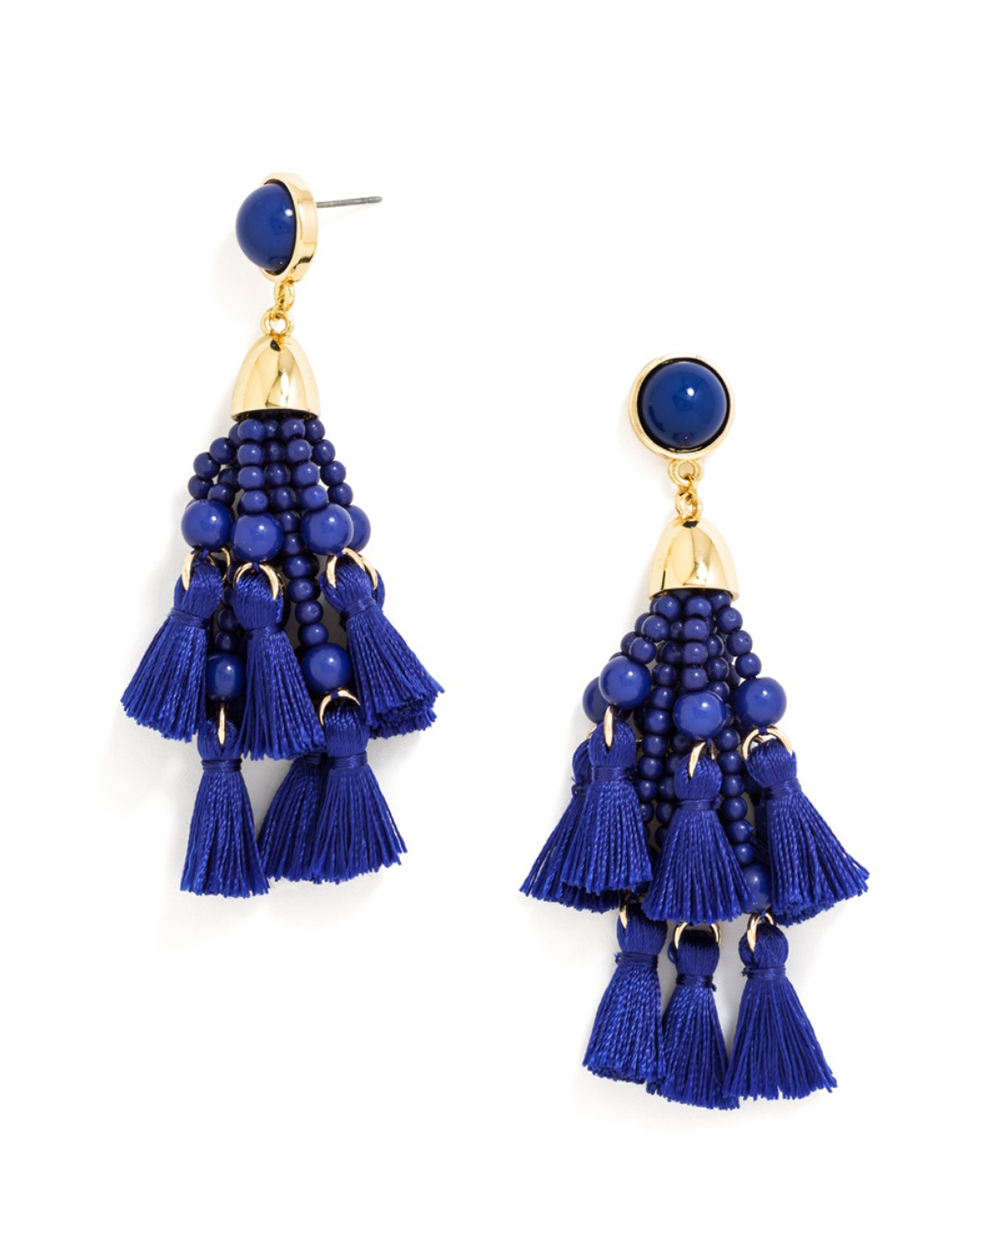 Earrings, approx $58, from Bauble Bar.